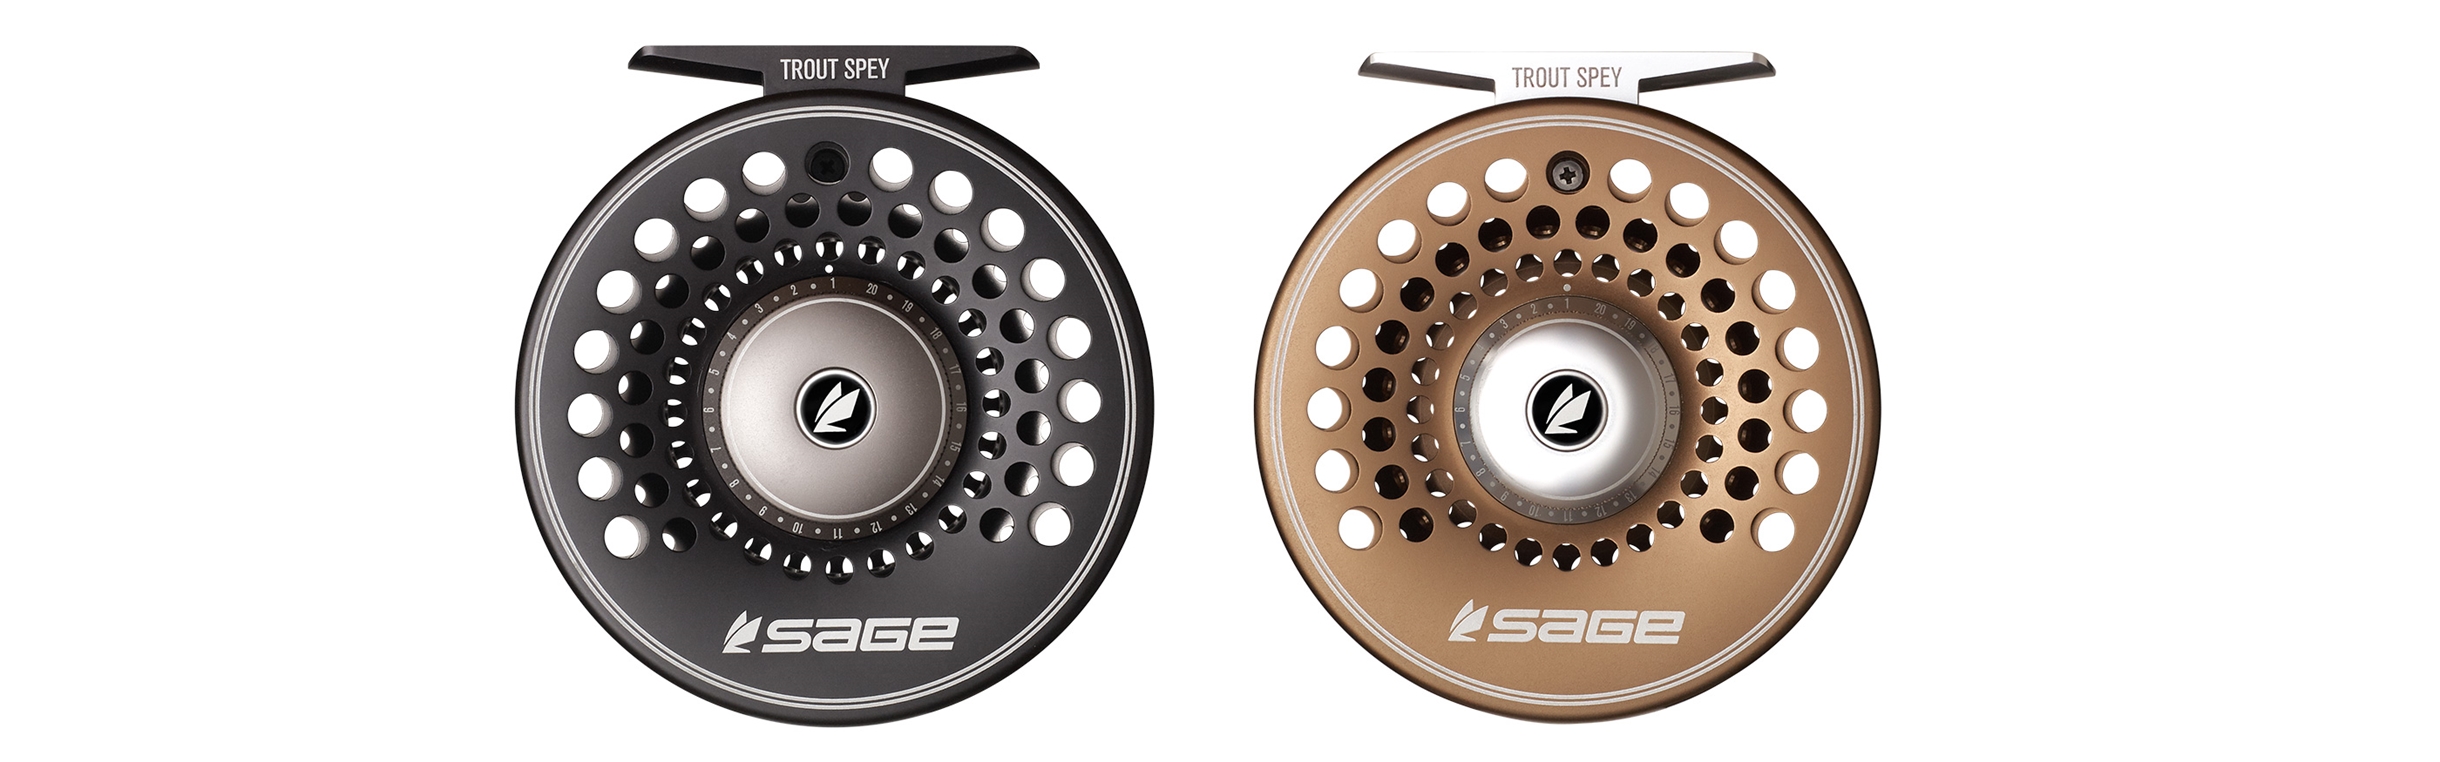 Sage Trout Spey Reel - Click Image to Close